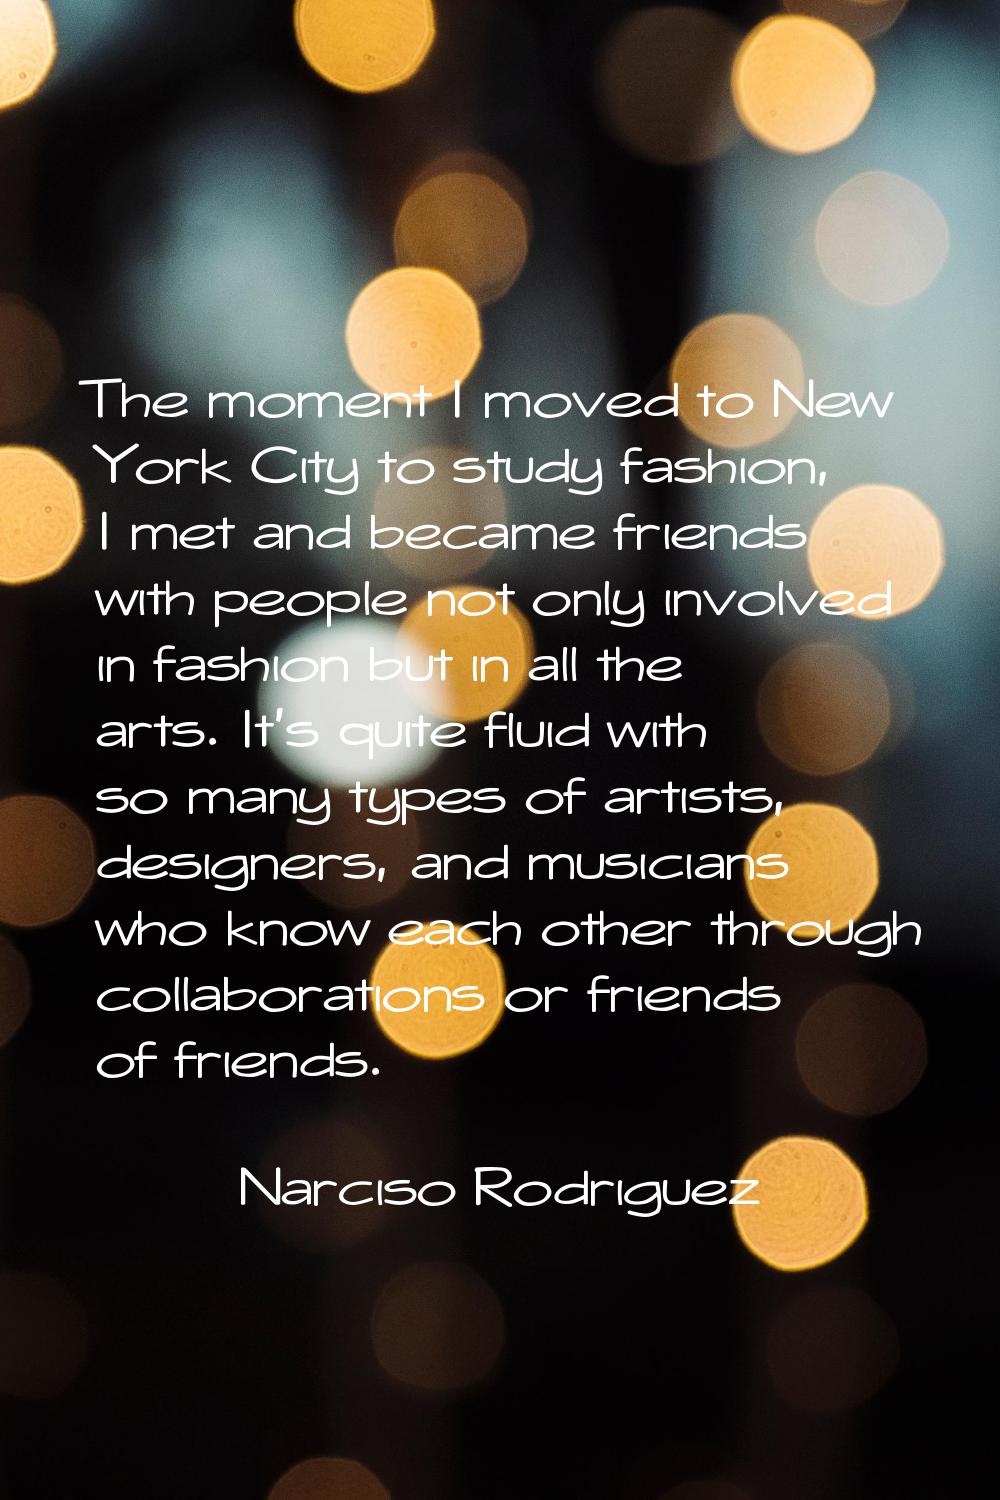 The moment I moved to New York City to study fashion, I met and became friends with people not only